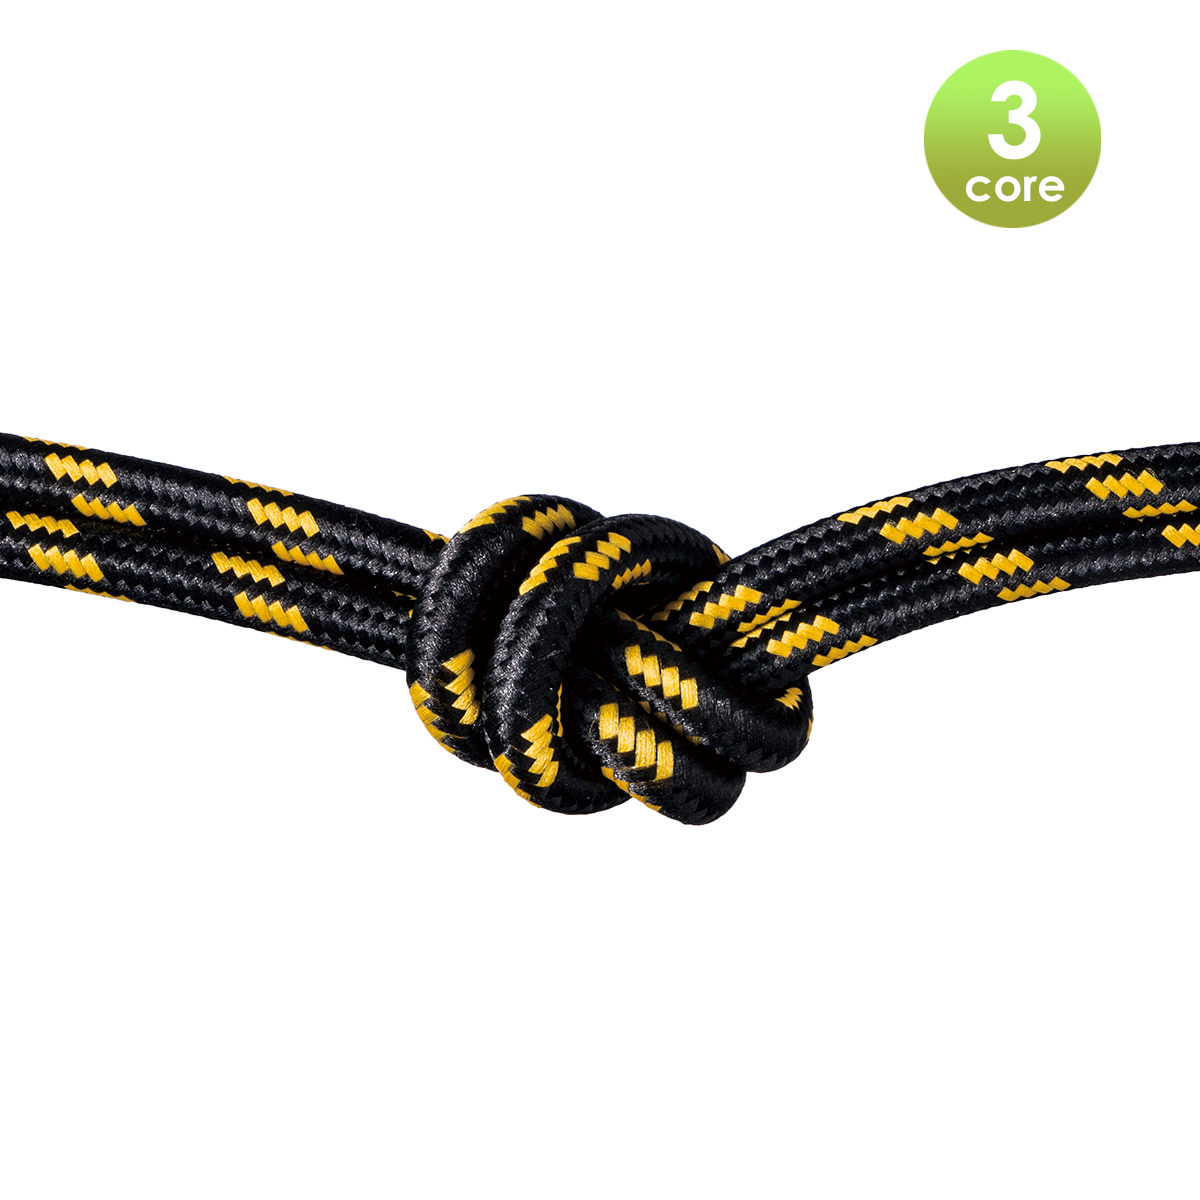 Tangla lighting - TLCB03005C - 3c - Fabric cable 3 core - in black and yellow